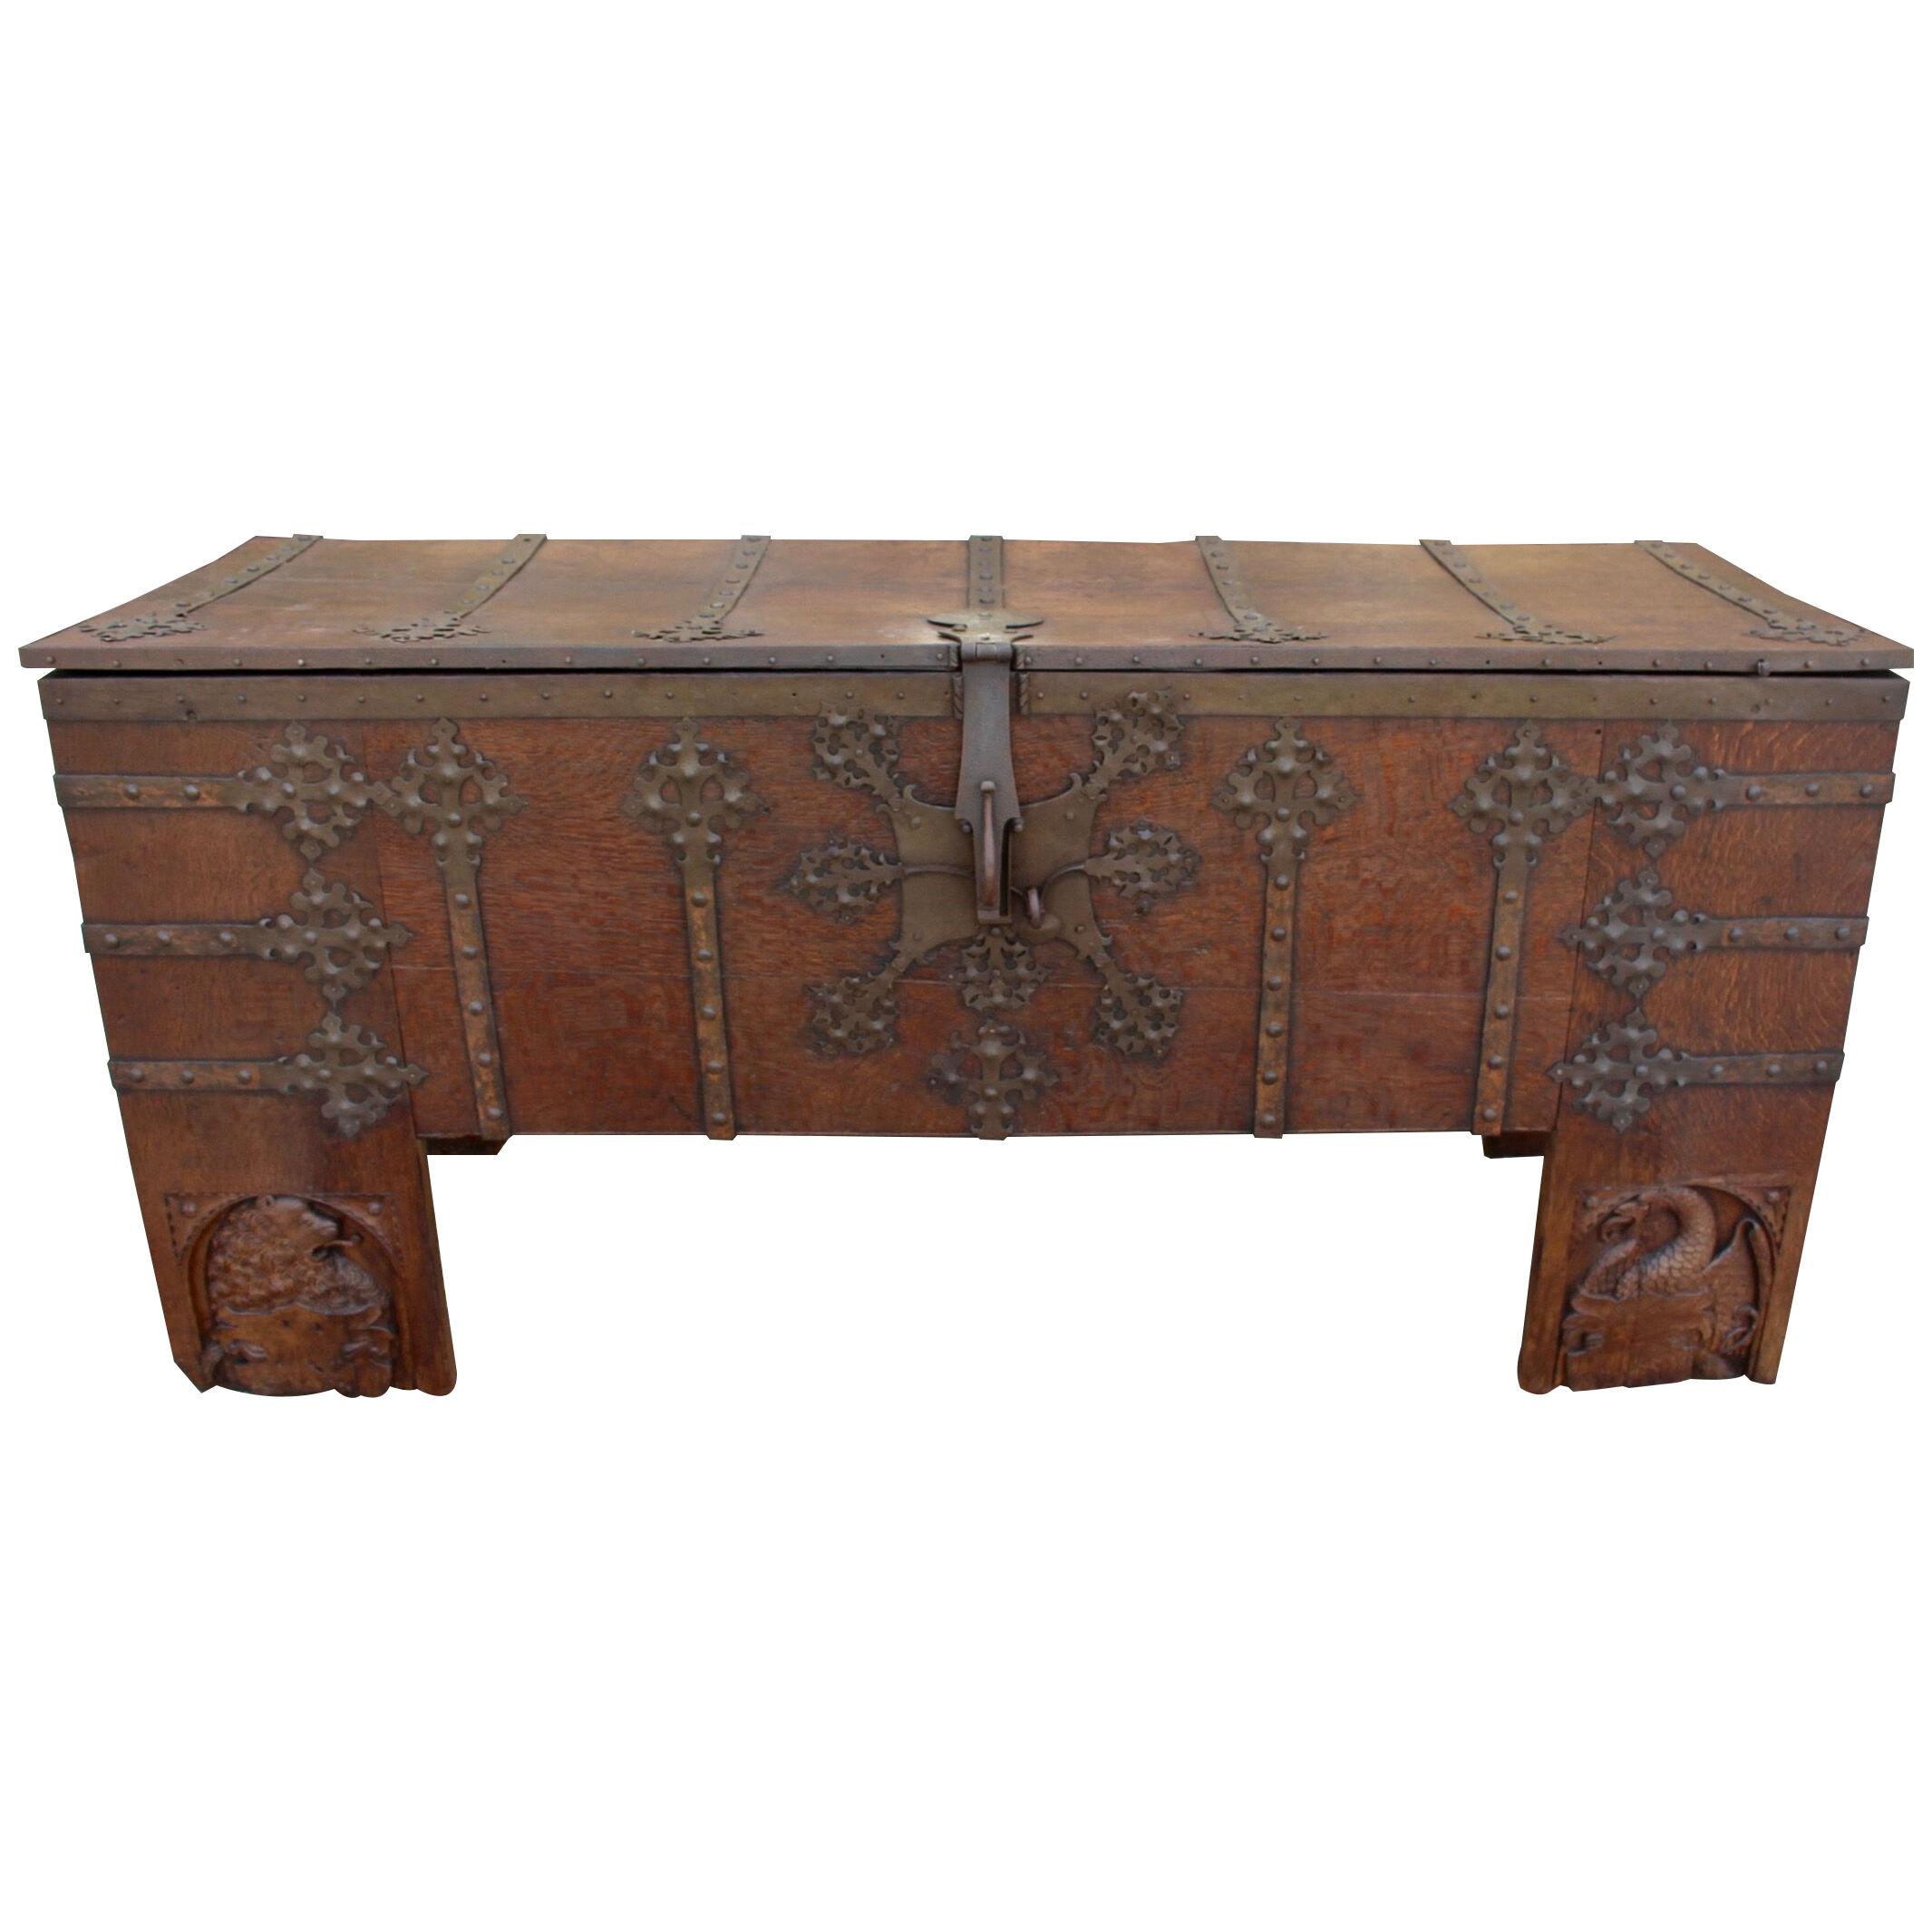 Rare Late Medieval 16th Century German Wrought Iron Oak Chest or Stollentruhe